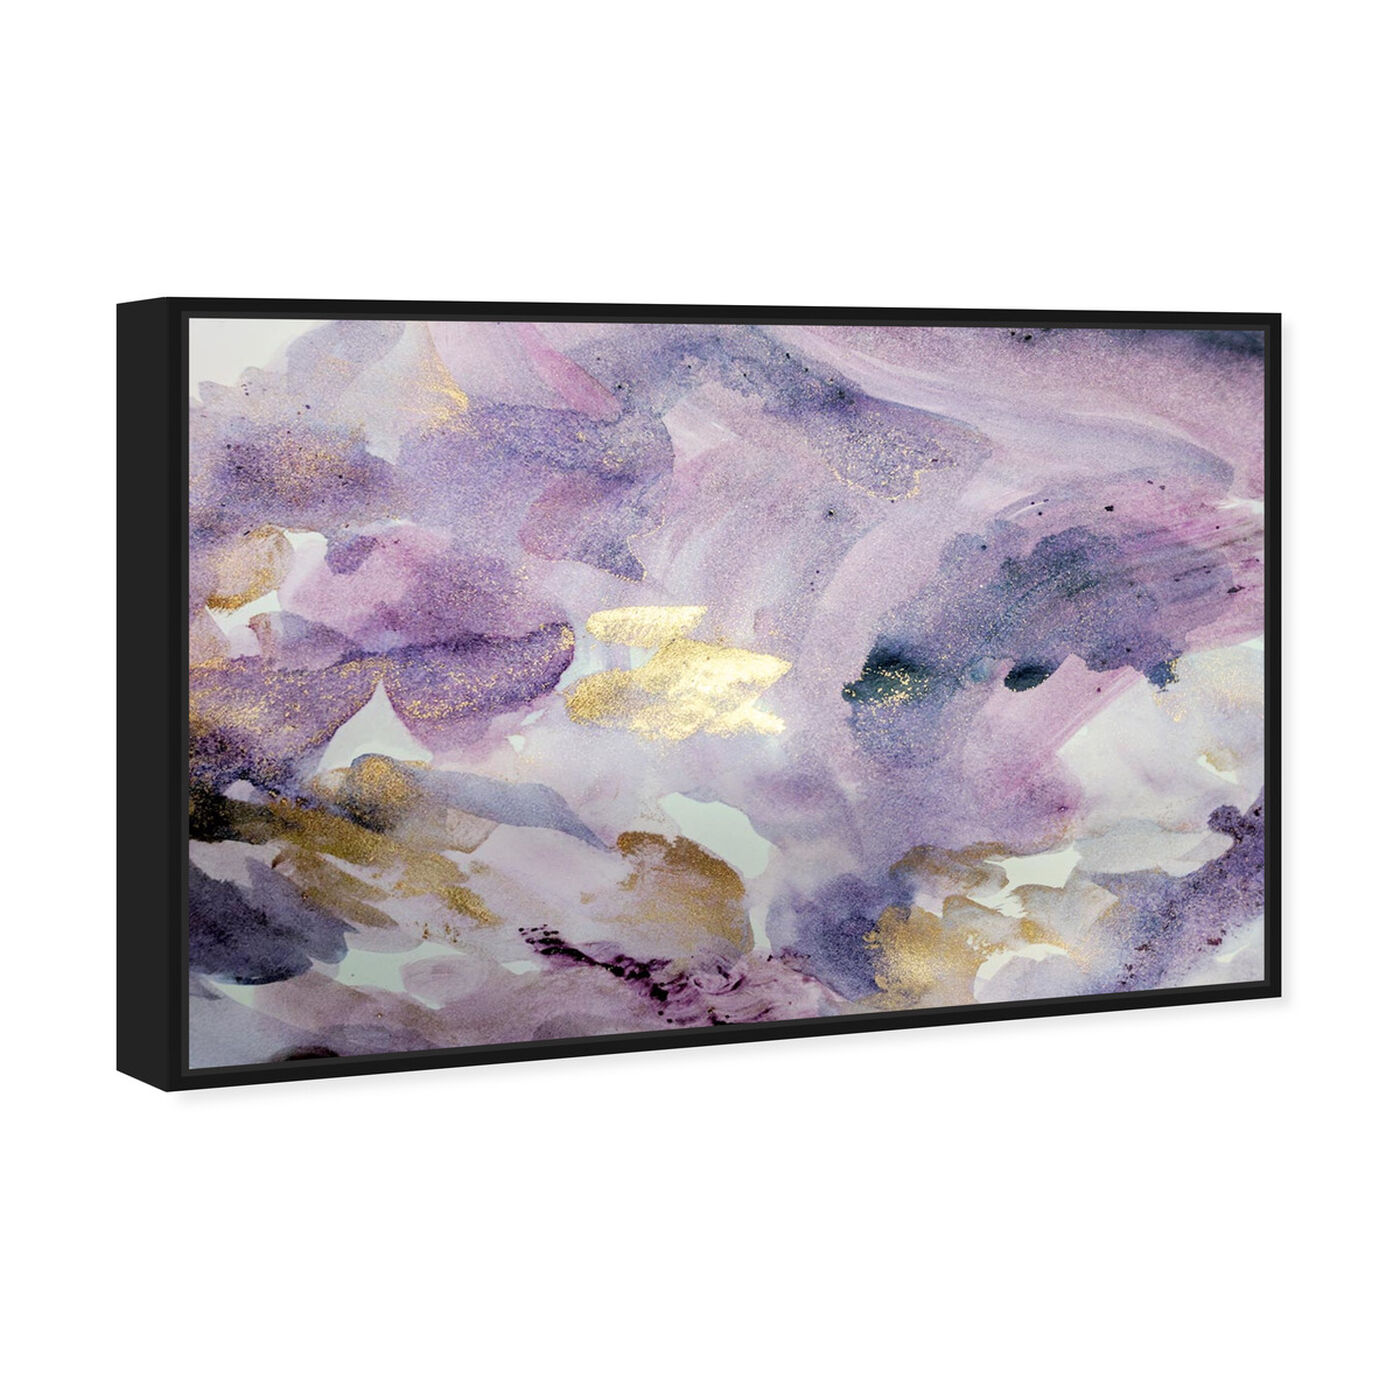  The Oliver Gal Artist Co. Fashion Wall Art Canvas